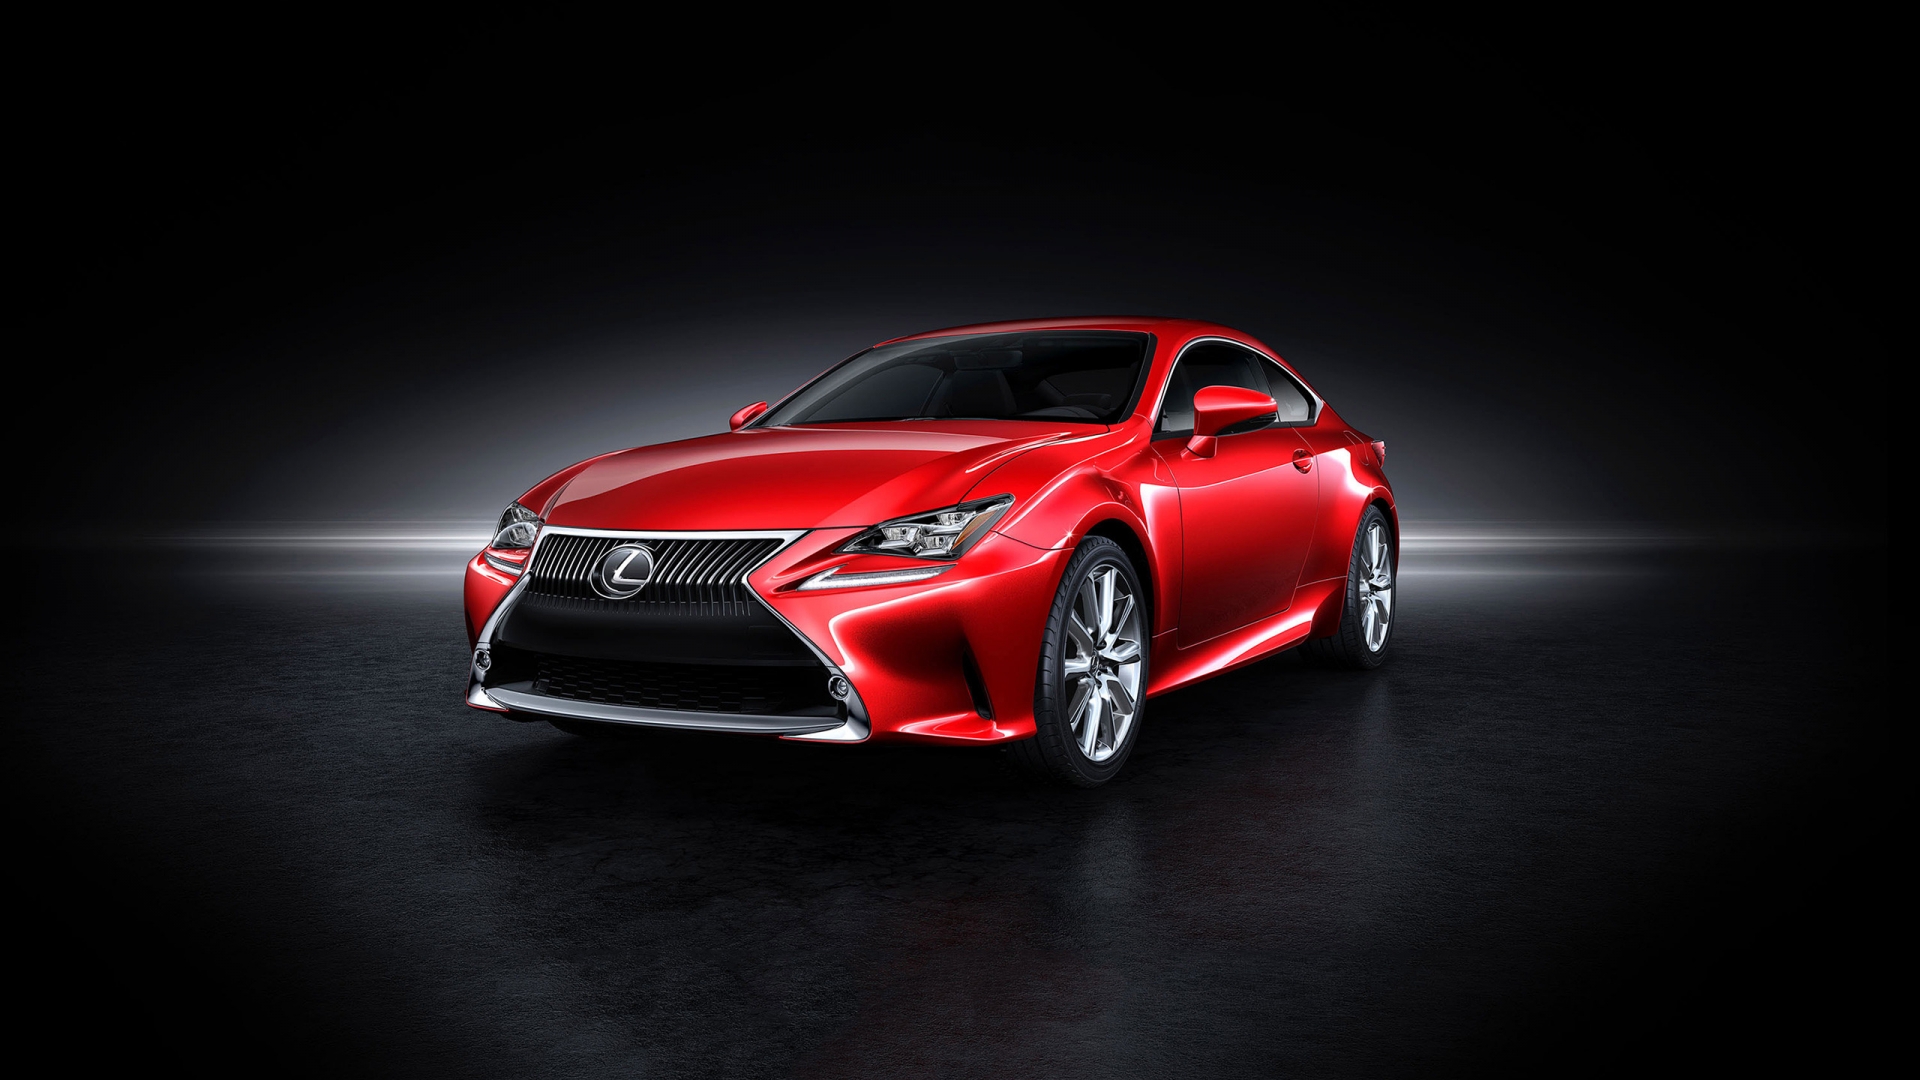 Lexus RC Coupe 2014 for 1920 x 1080 HDTV 1080p resolution